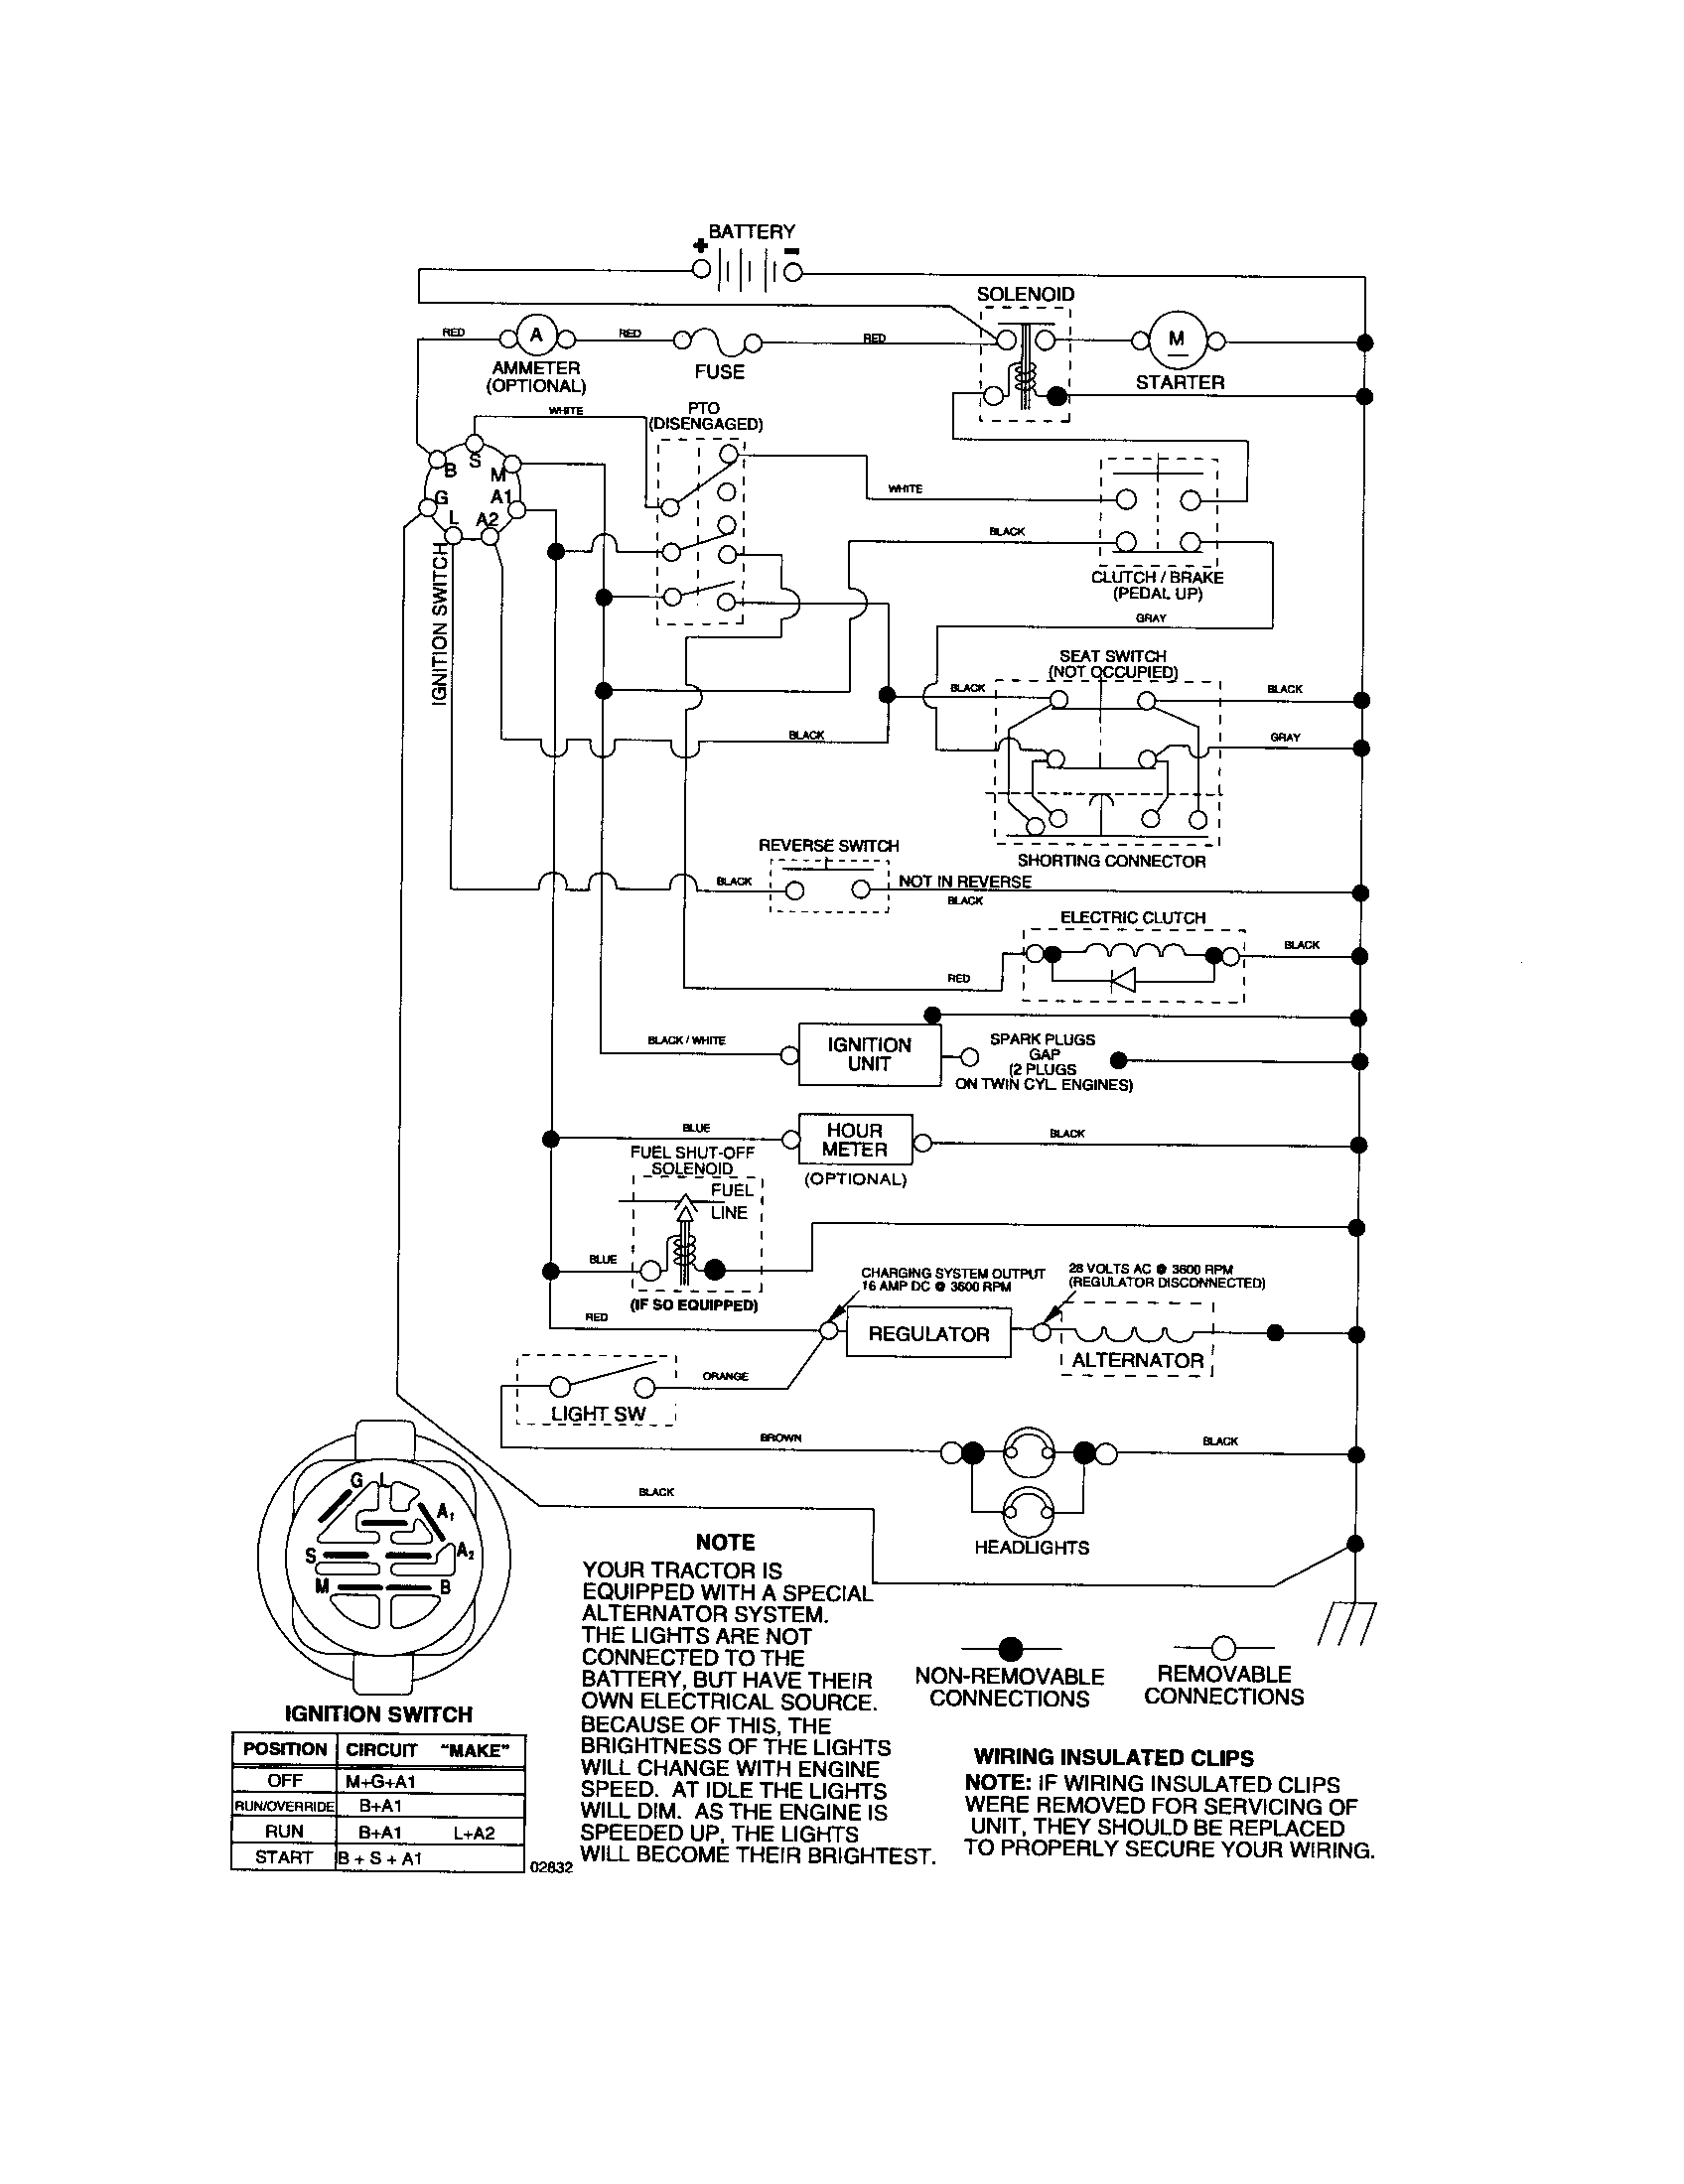 Toro Ignition Switch Wiring Diagram from c.searspartsdirect.com